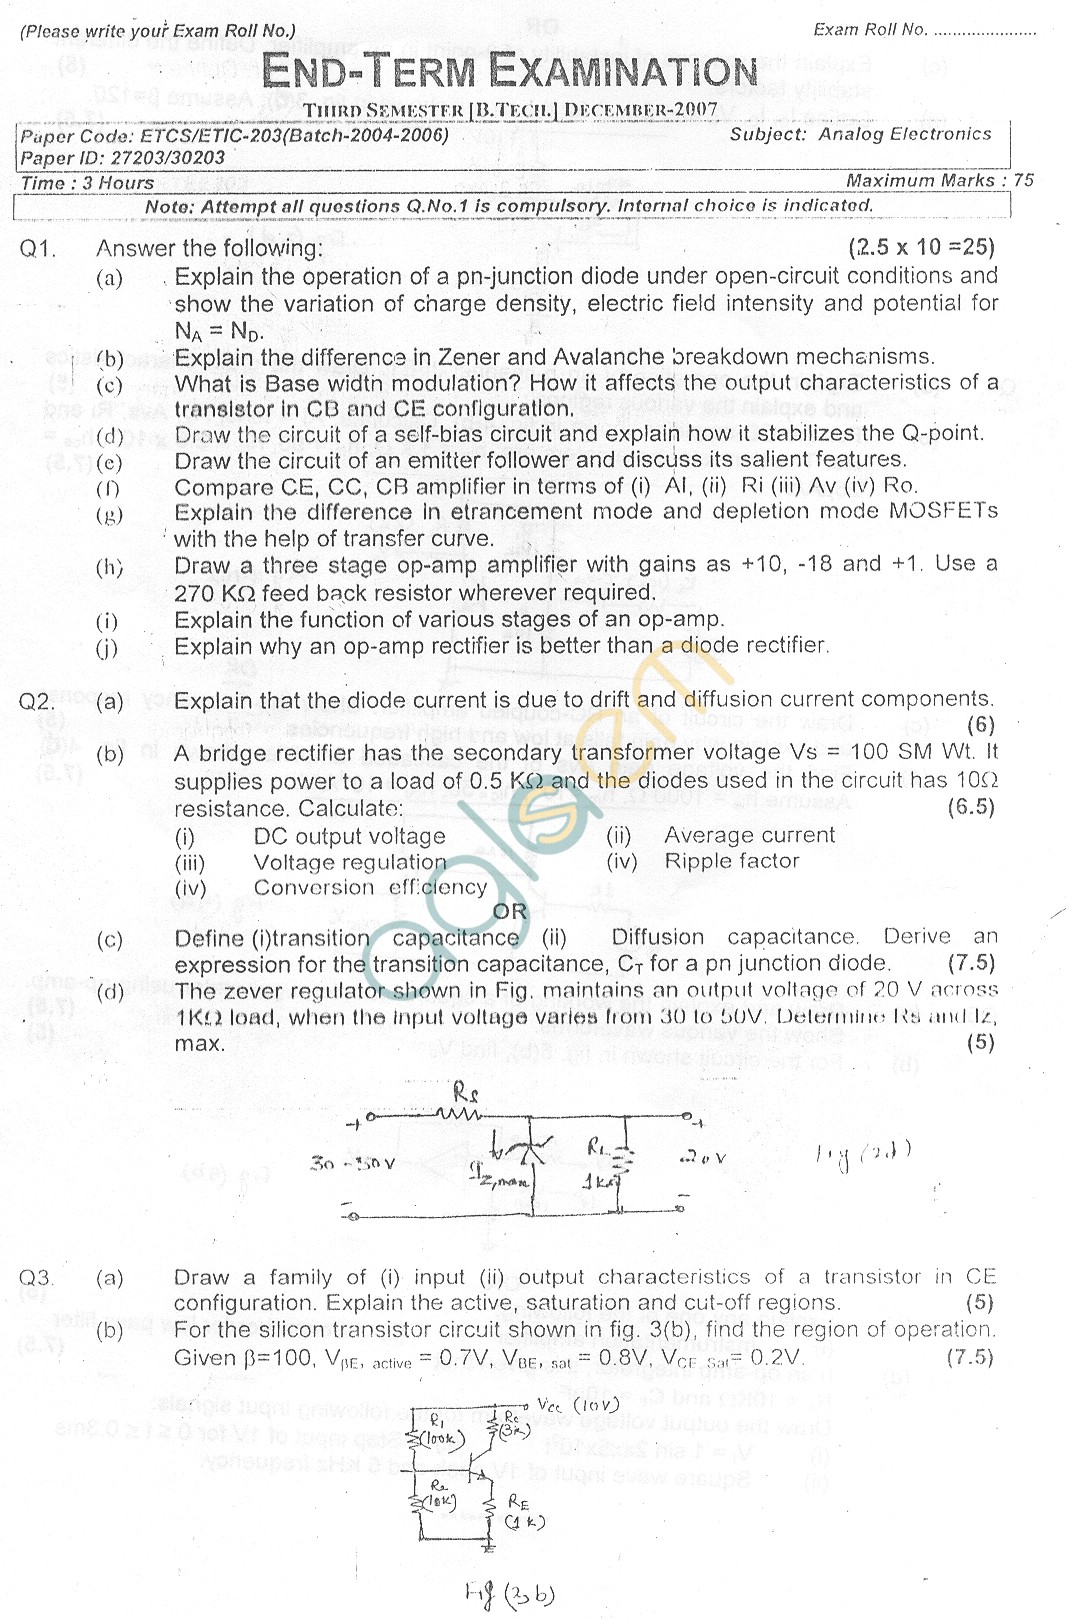 GGSIPU Question Papers Third Semester  End Term 2007  ETIC-203